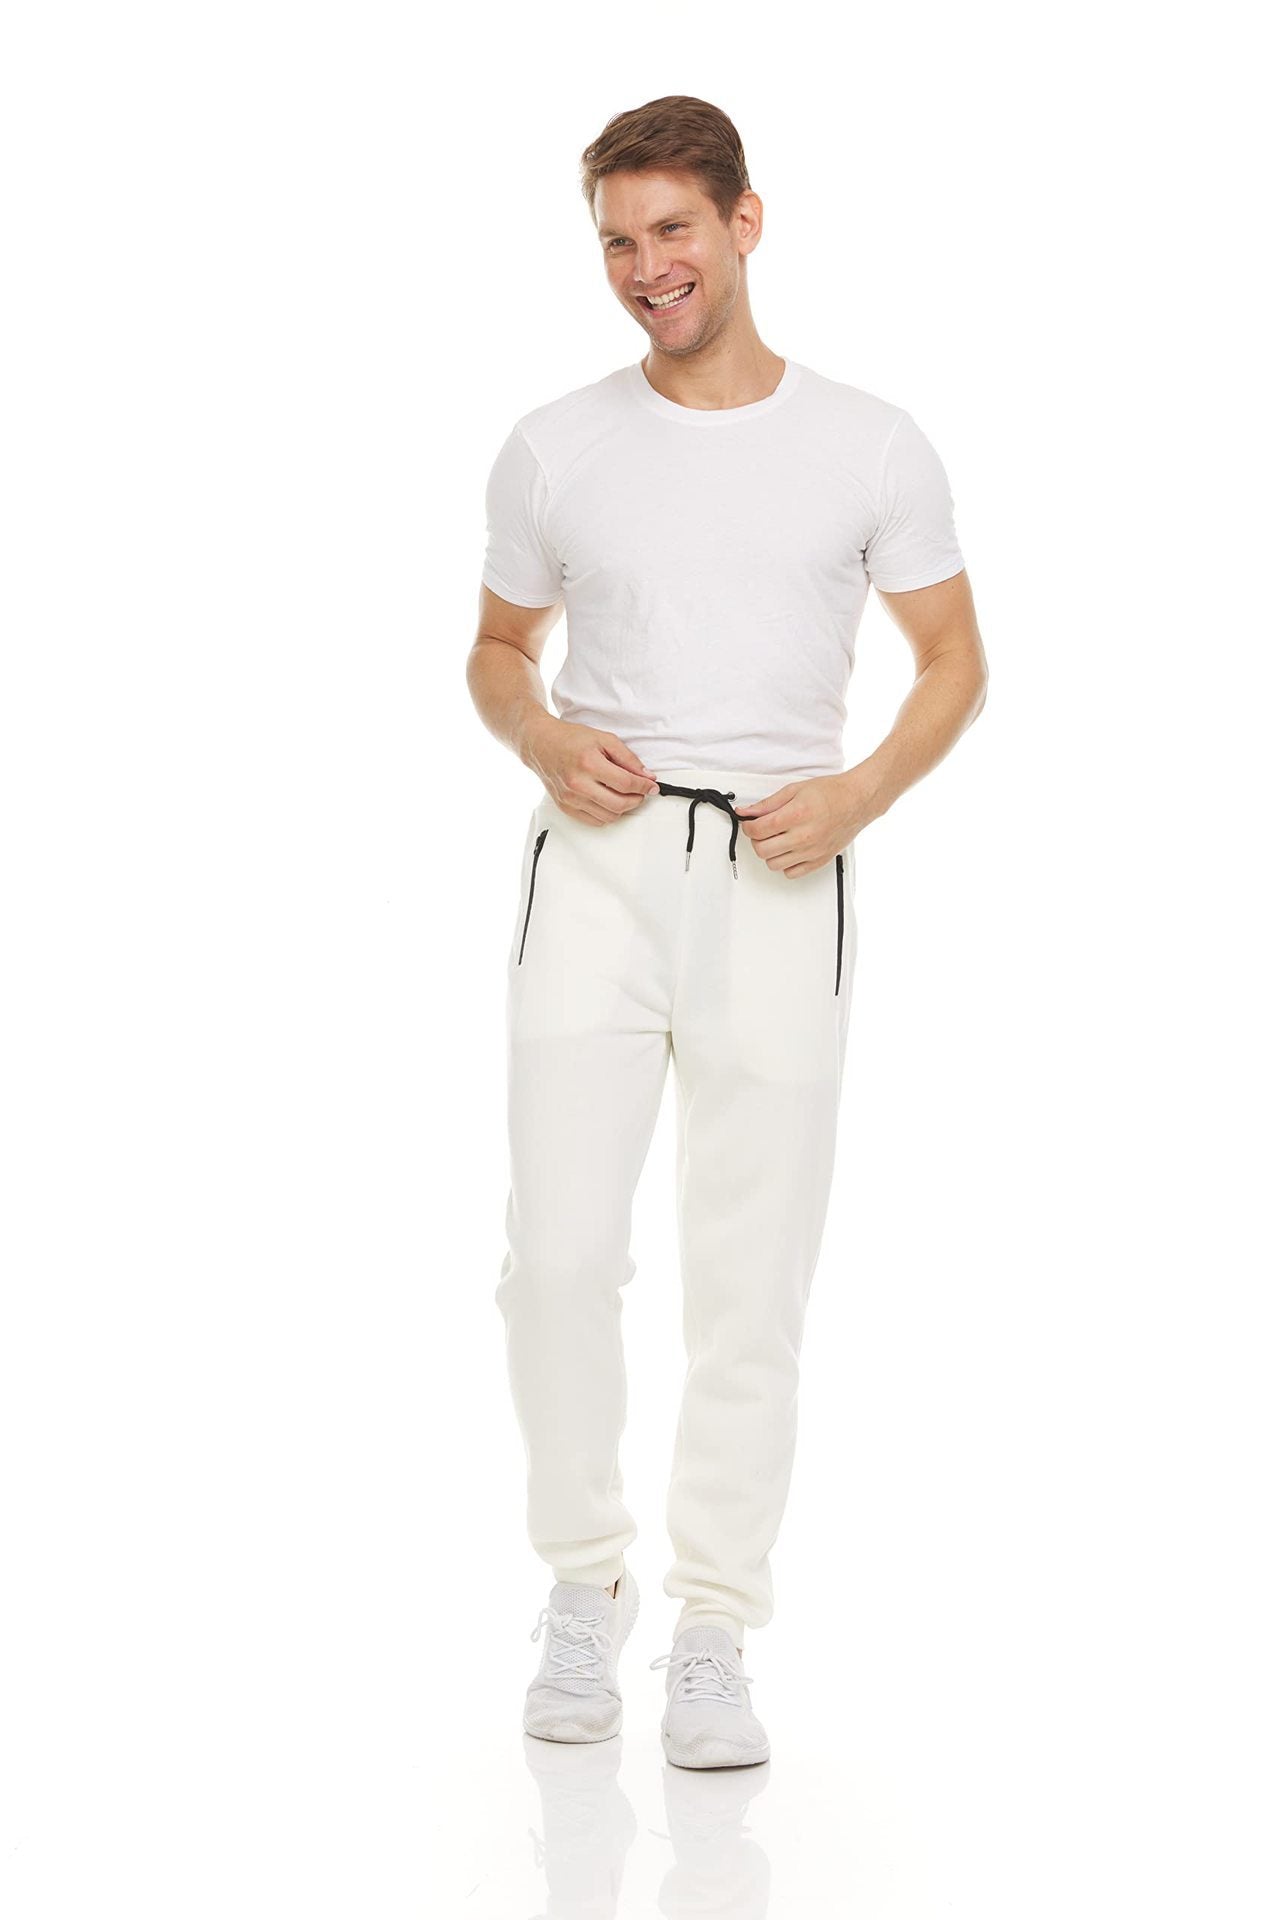 Men's Sports Casual Zipper Ankle-tied Feet Running Trousers